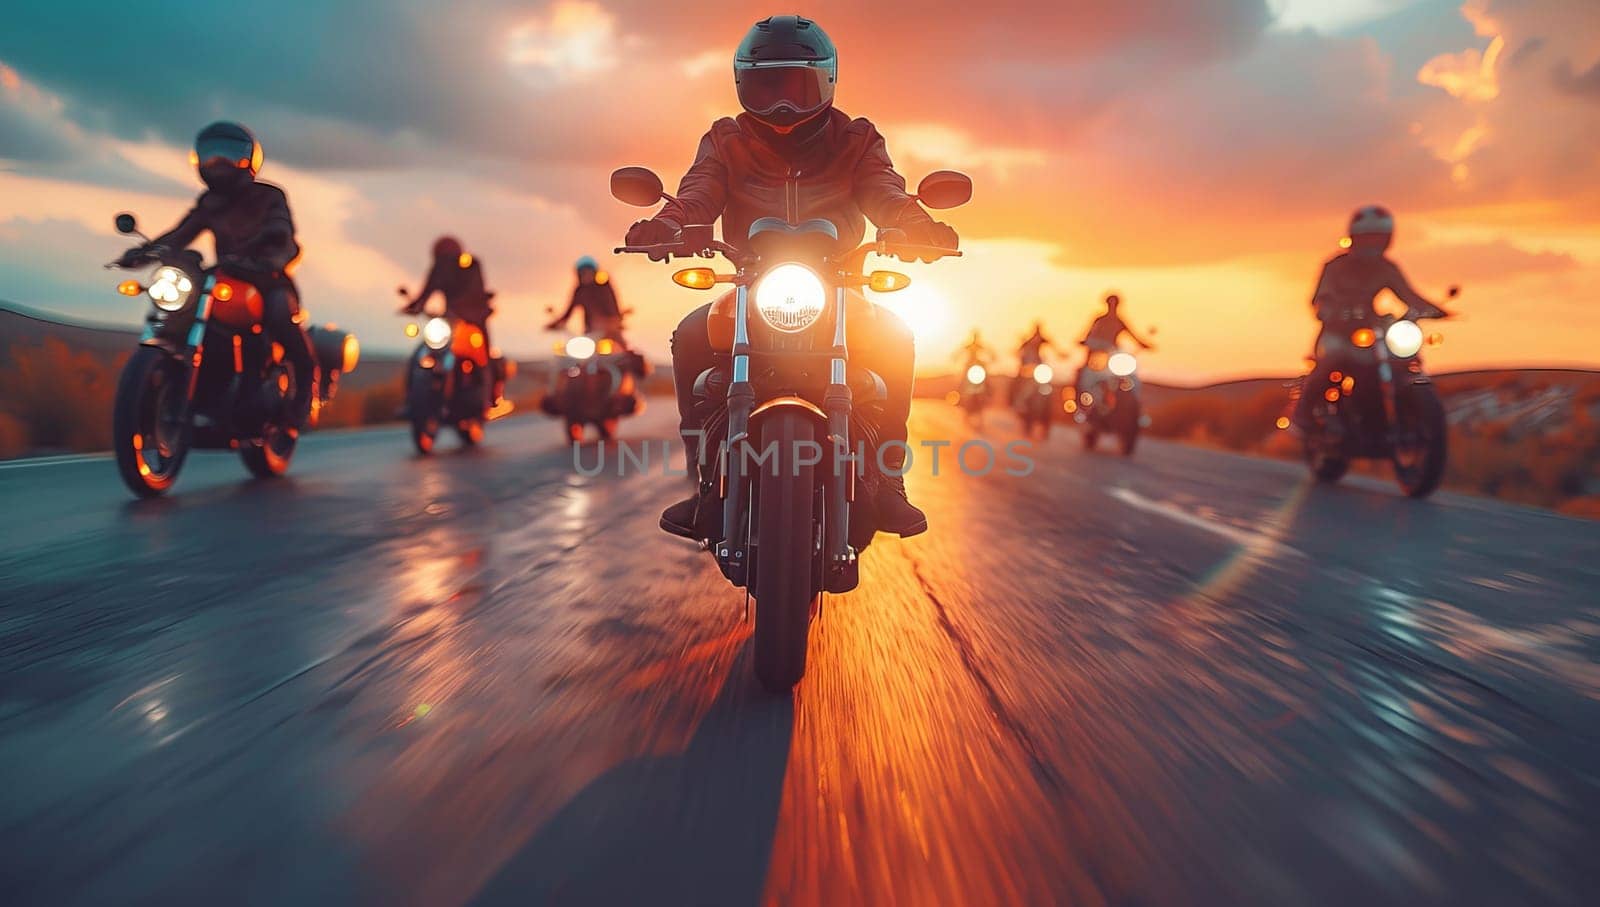 Motorcyclists riding on the road at sunset. Biker on a motorcycle.